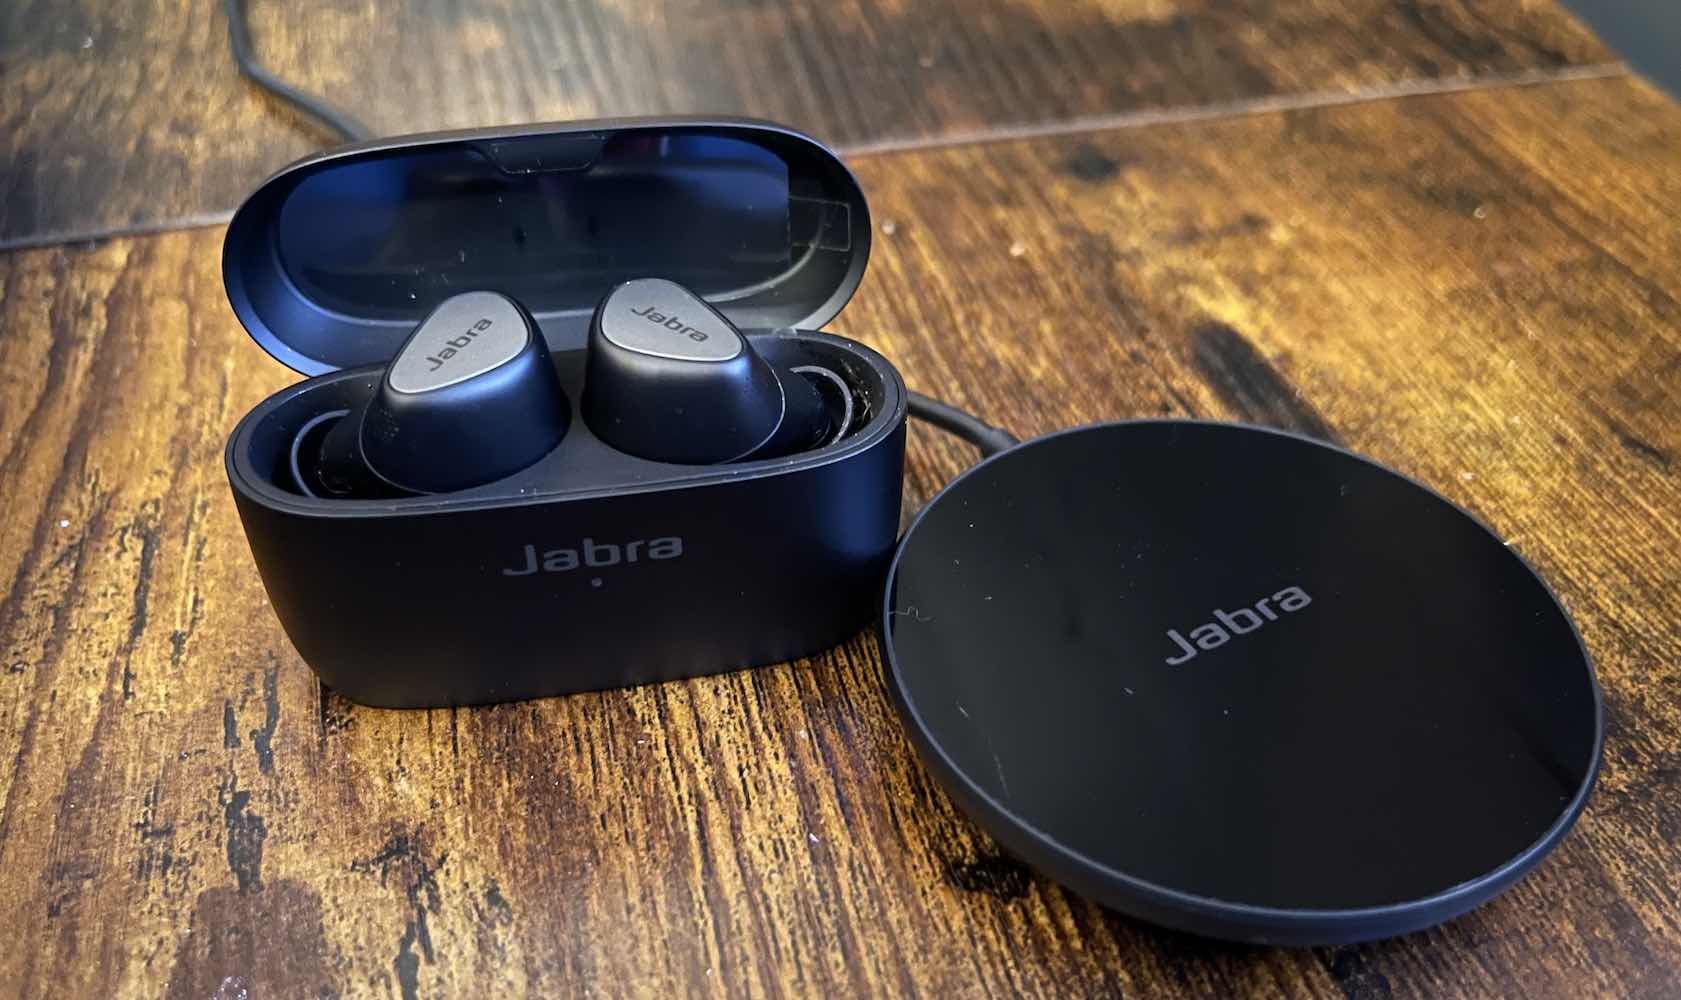 Jabra Connect 5t wireless earphones for working from home review